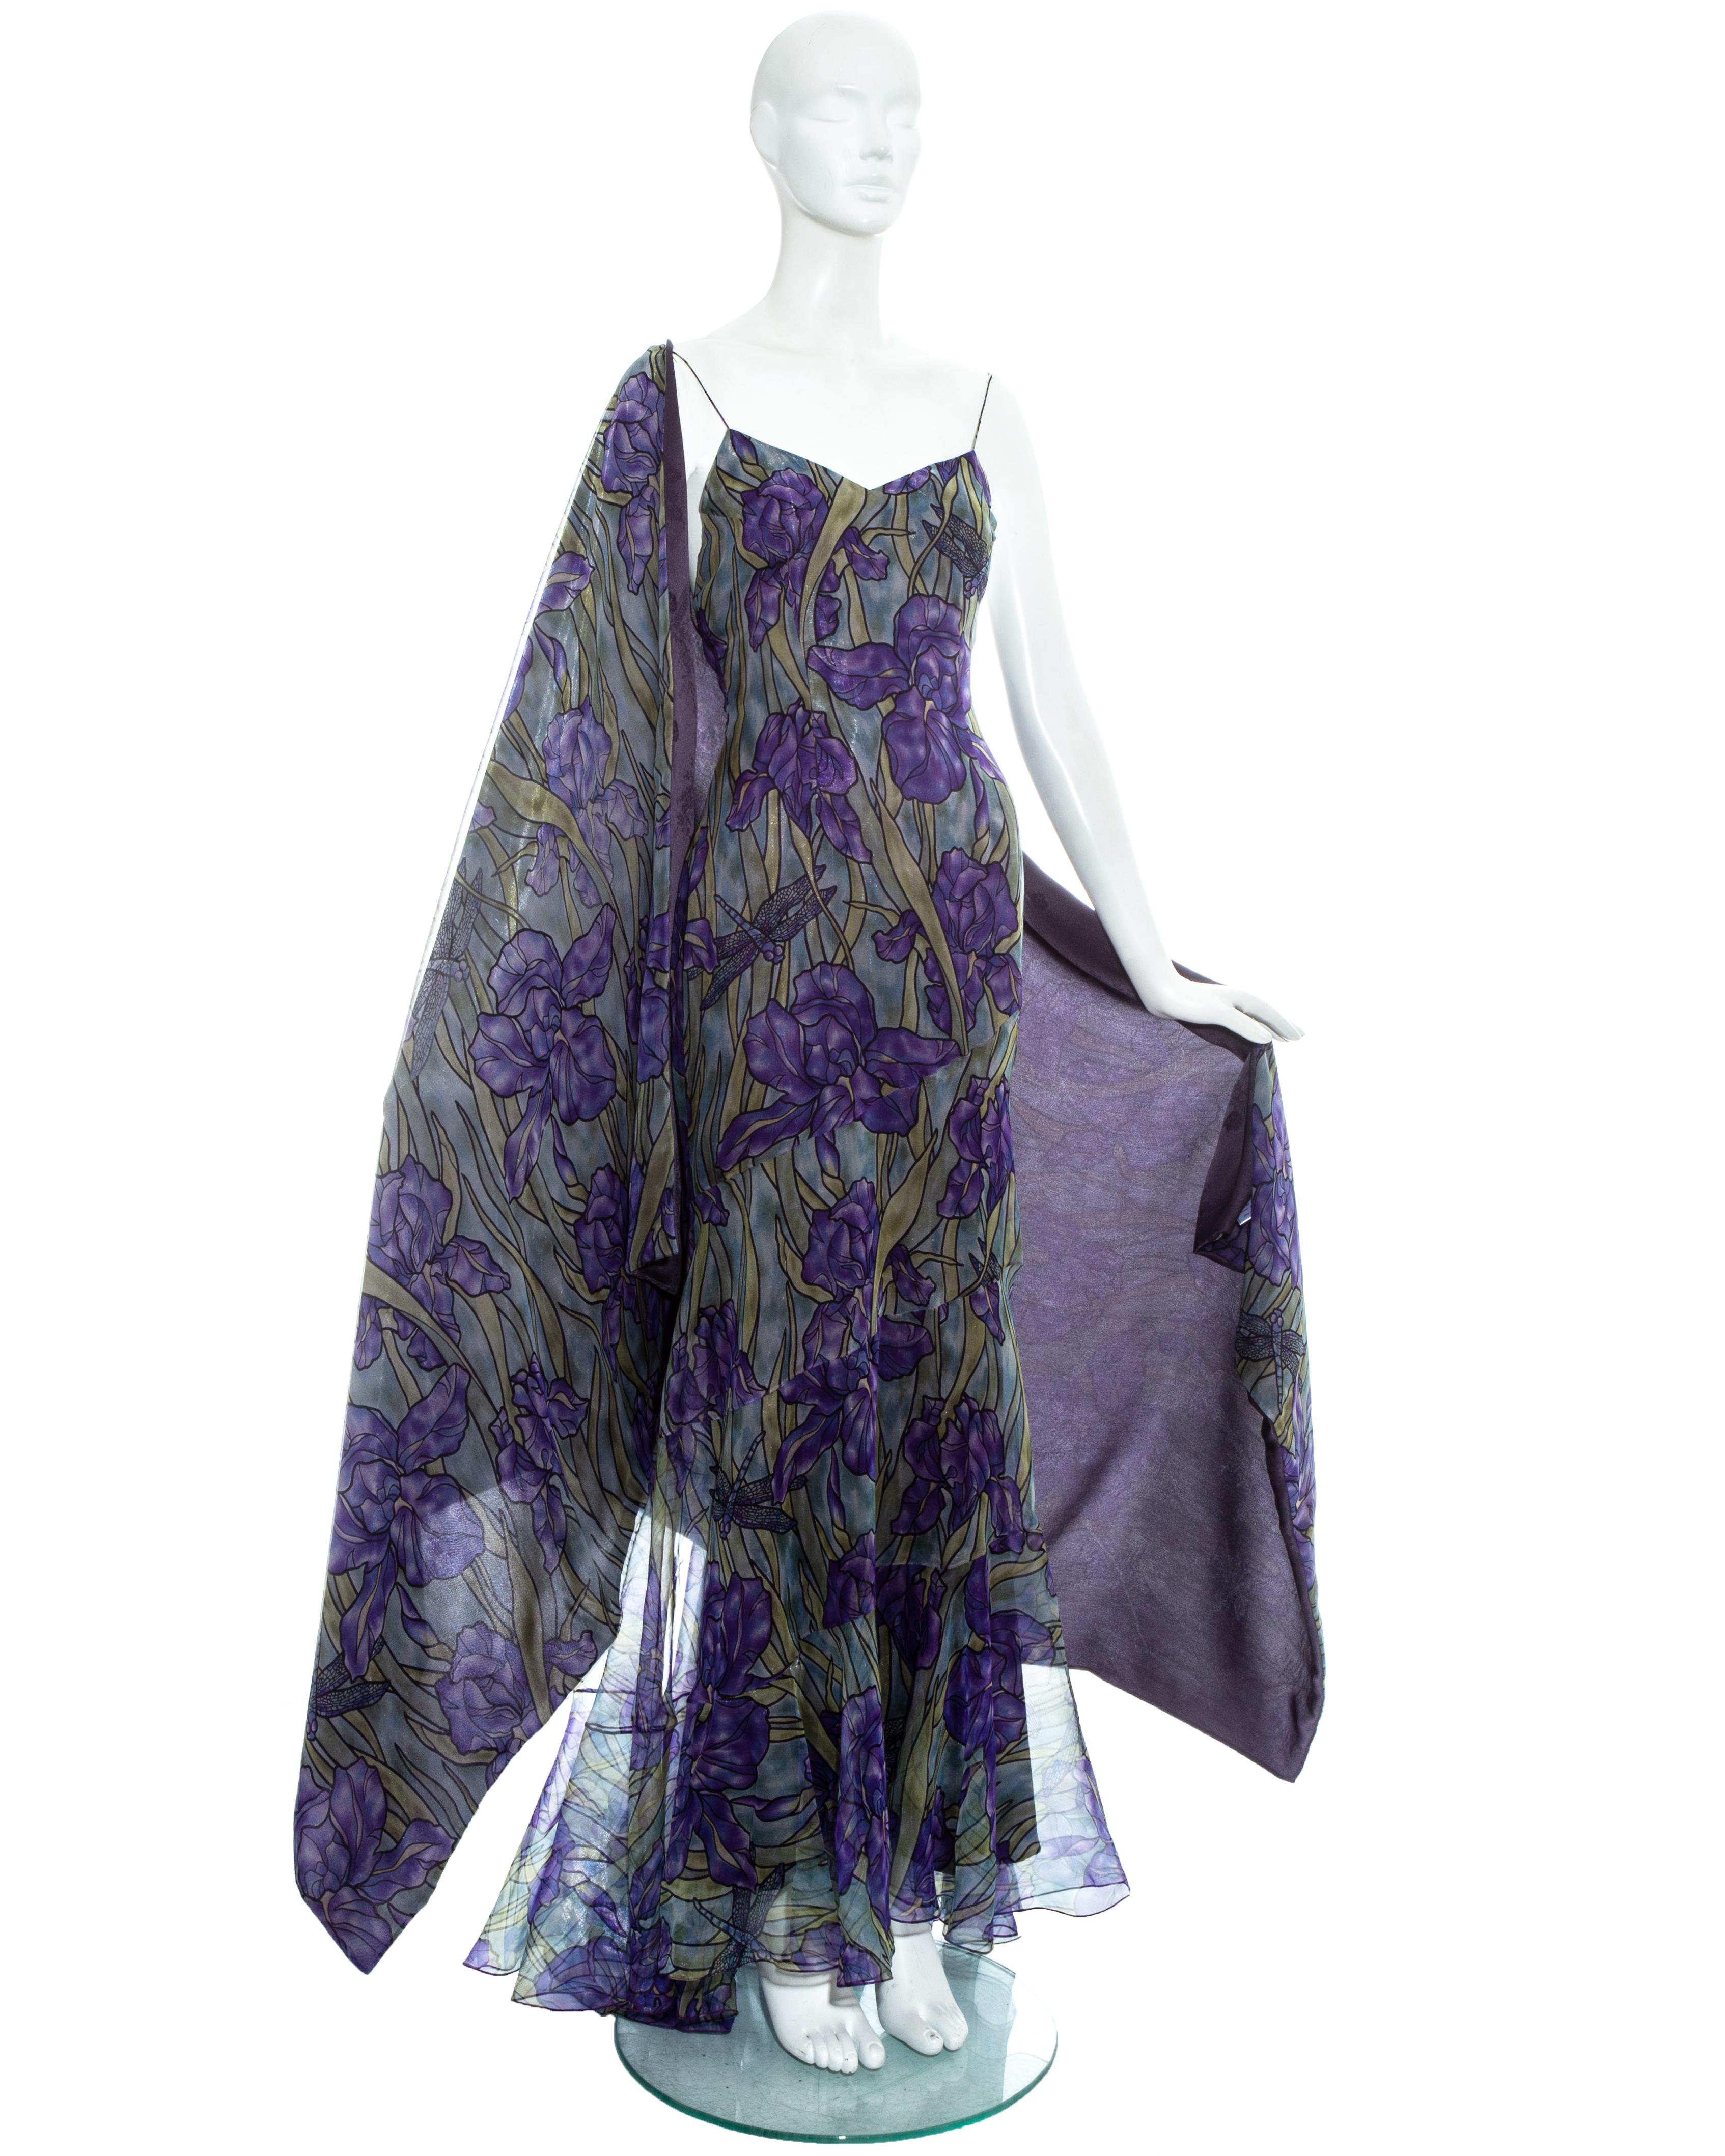 Christian Dior by John Galliano purple floral printed silk organza trained evening dress and large shawl with floral silk brocade lining

Fall-Winter 1998